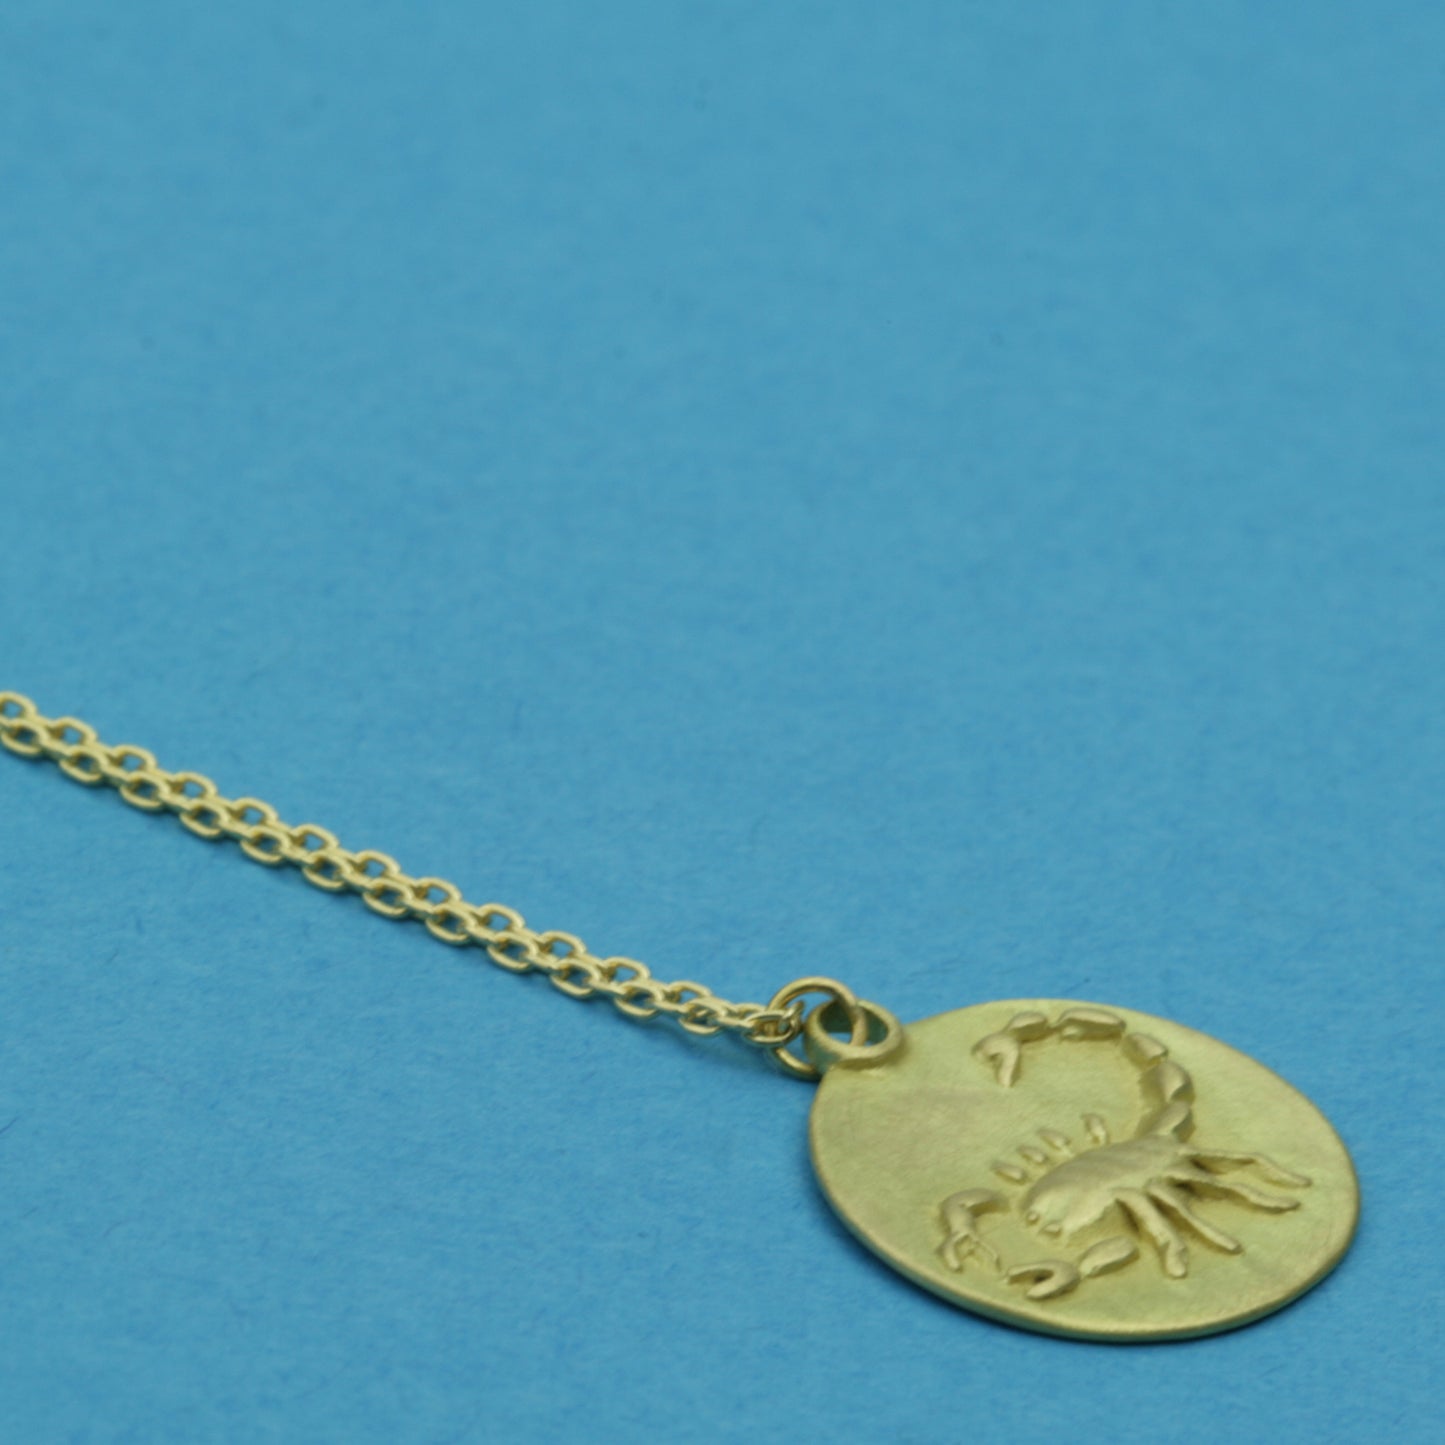 Scorpio Medal with cable chain, side view